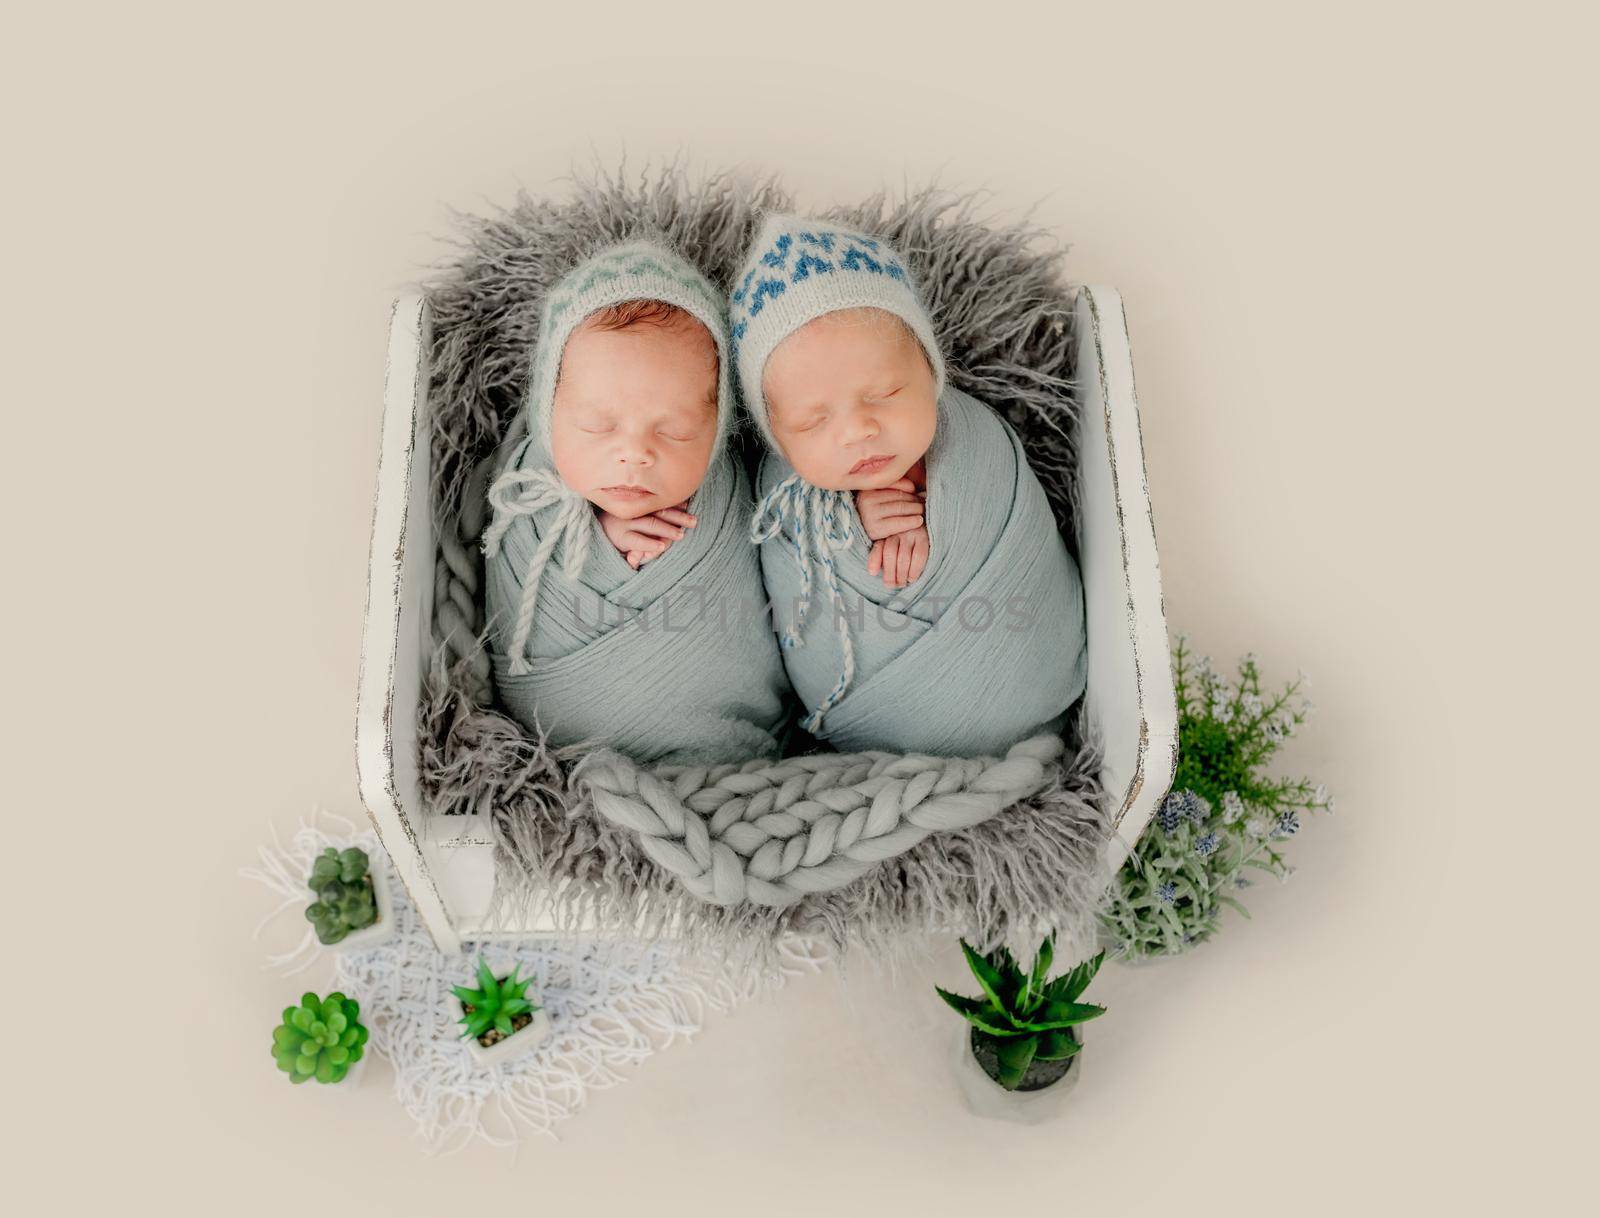 Twins newborn babies sleeping in tiny wooden bed studio portrait. Siblings brothers infant children napping together